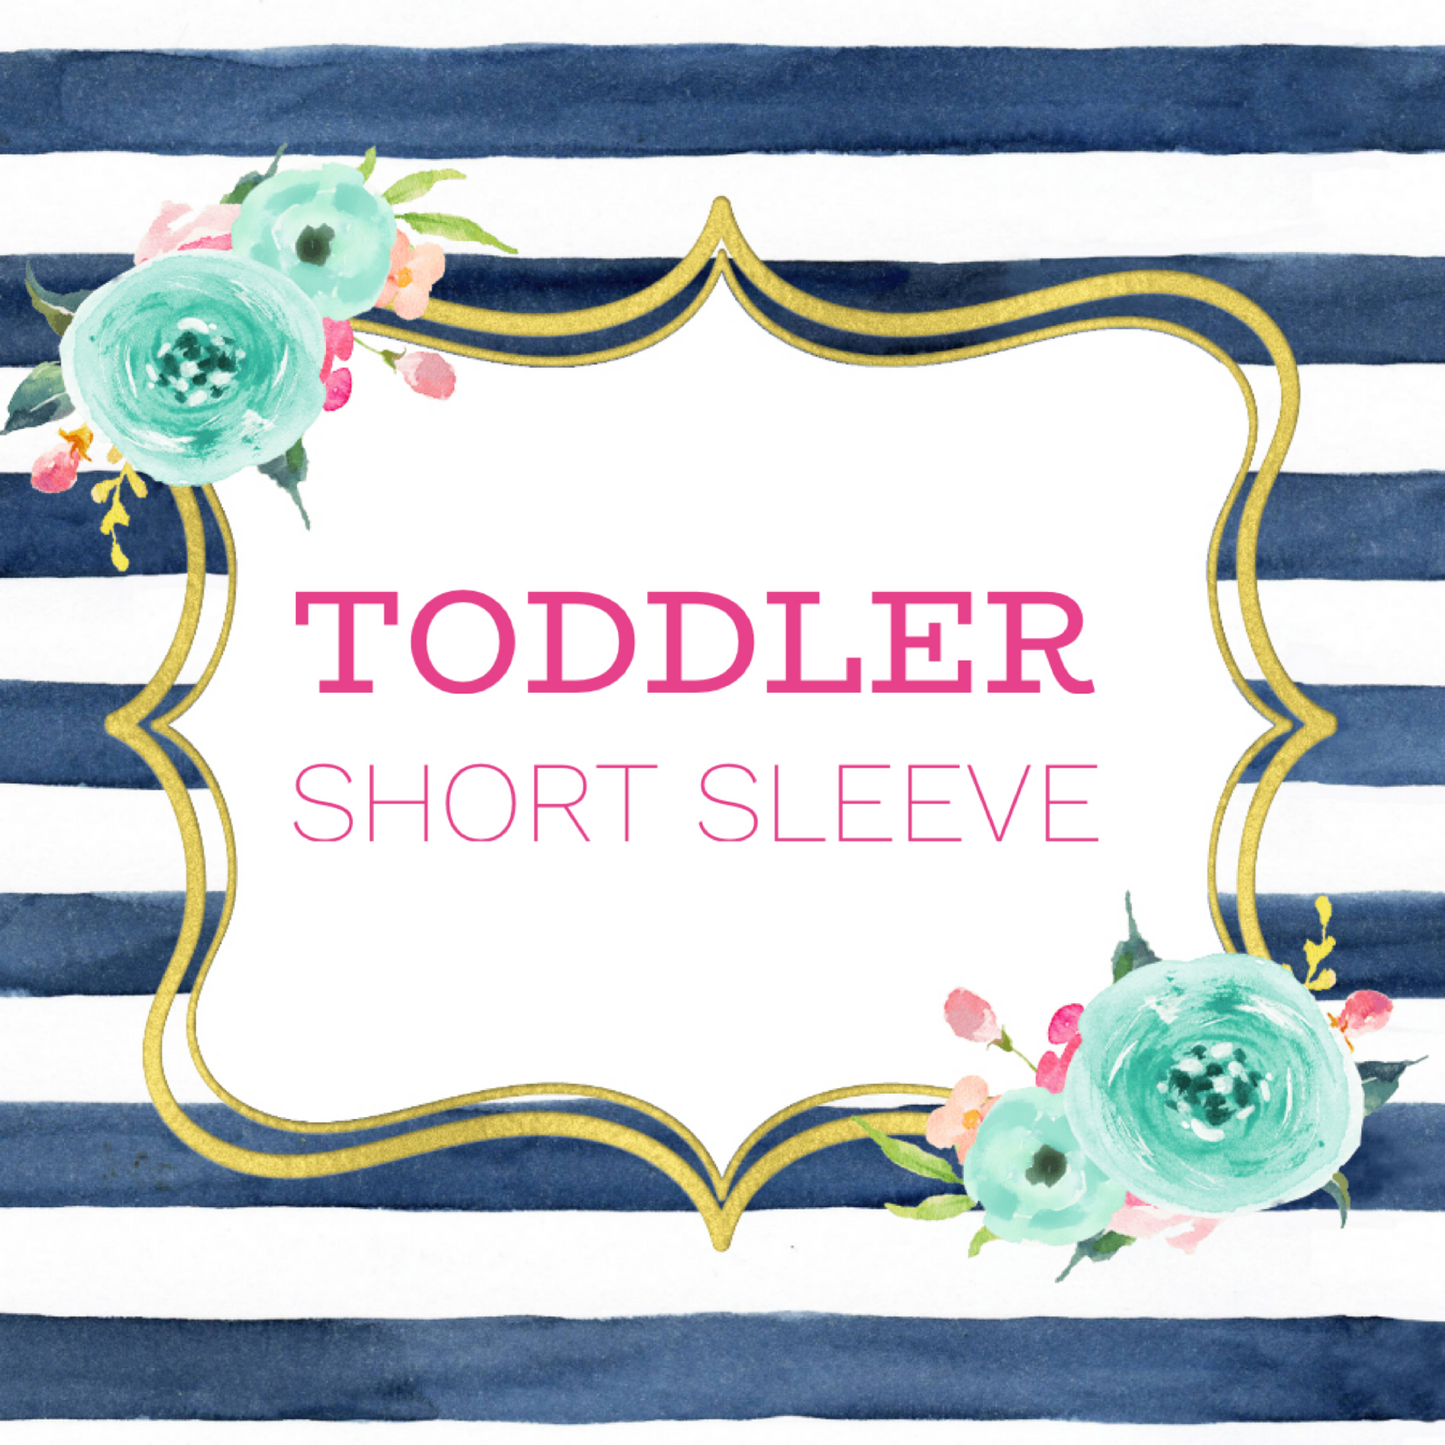 Toddler Short Sleeve (One Color) - $18